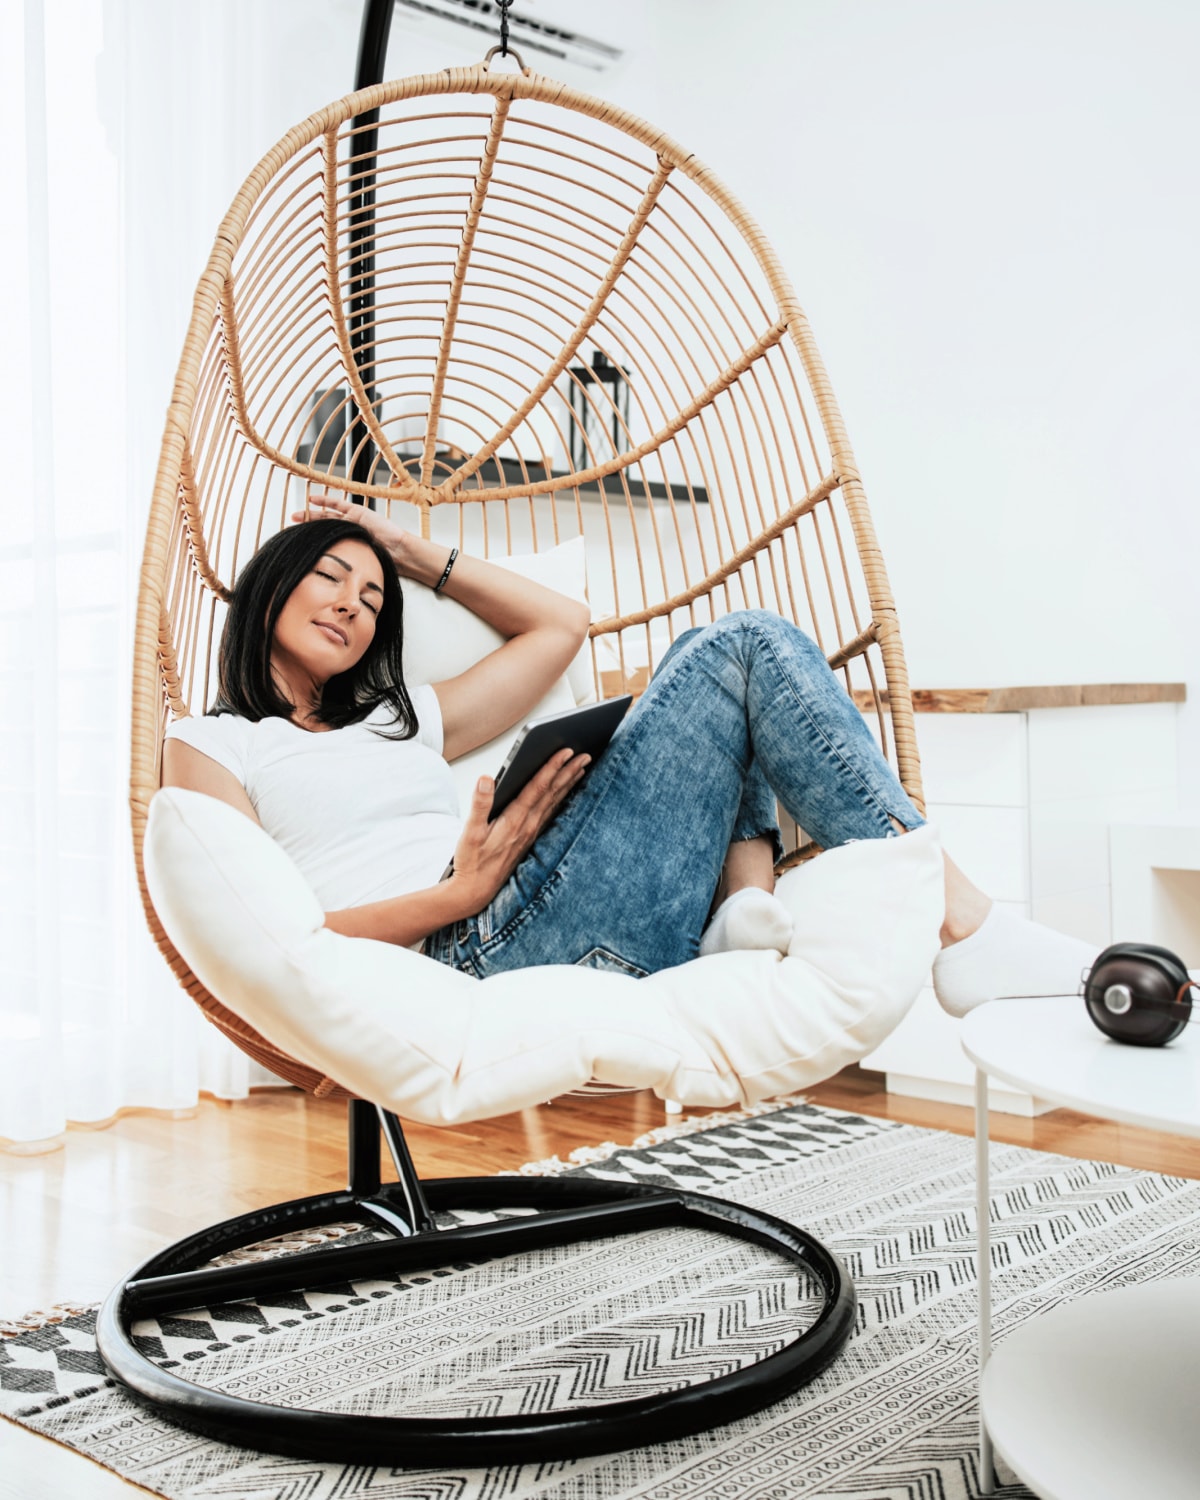 A woman reading tips on how to make life easier while relaxing in a beautiful chair